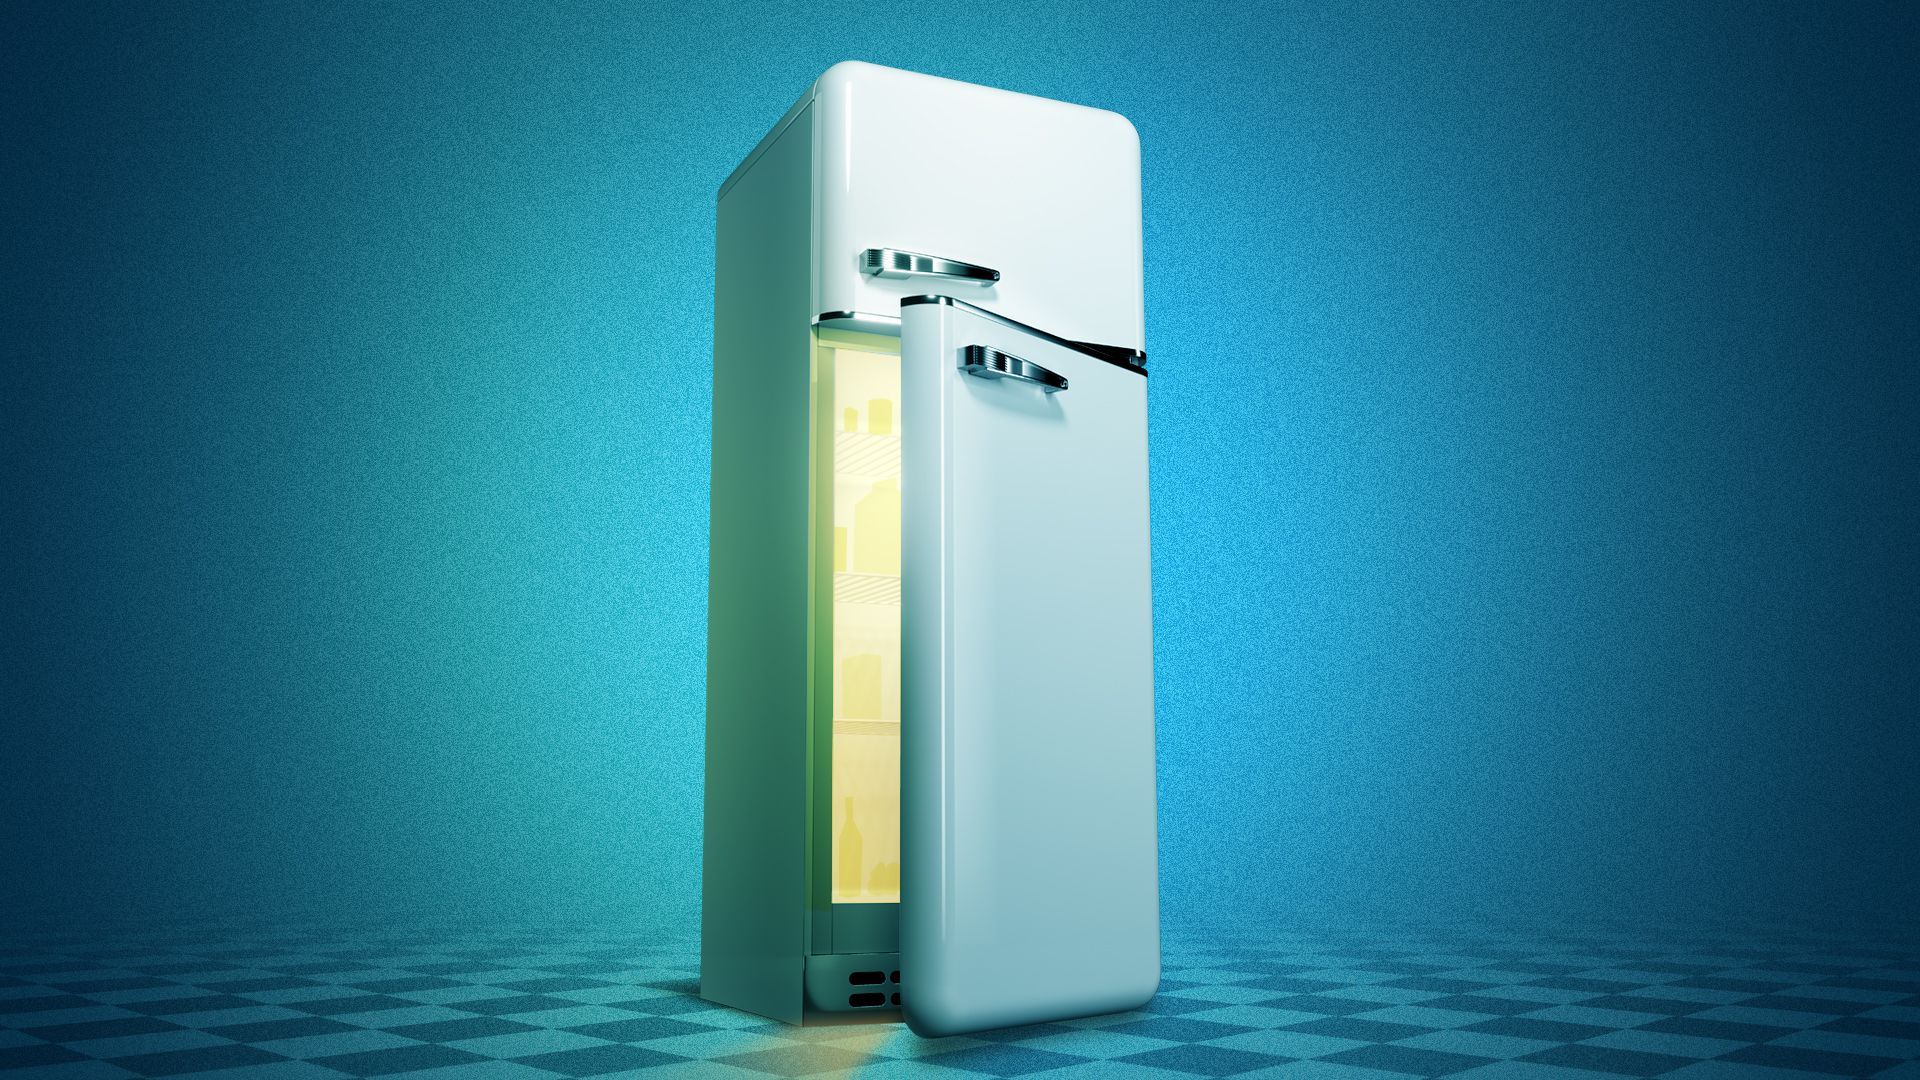 Illustration of an open fridge with light coming out